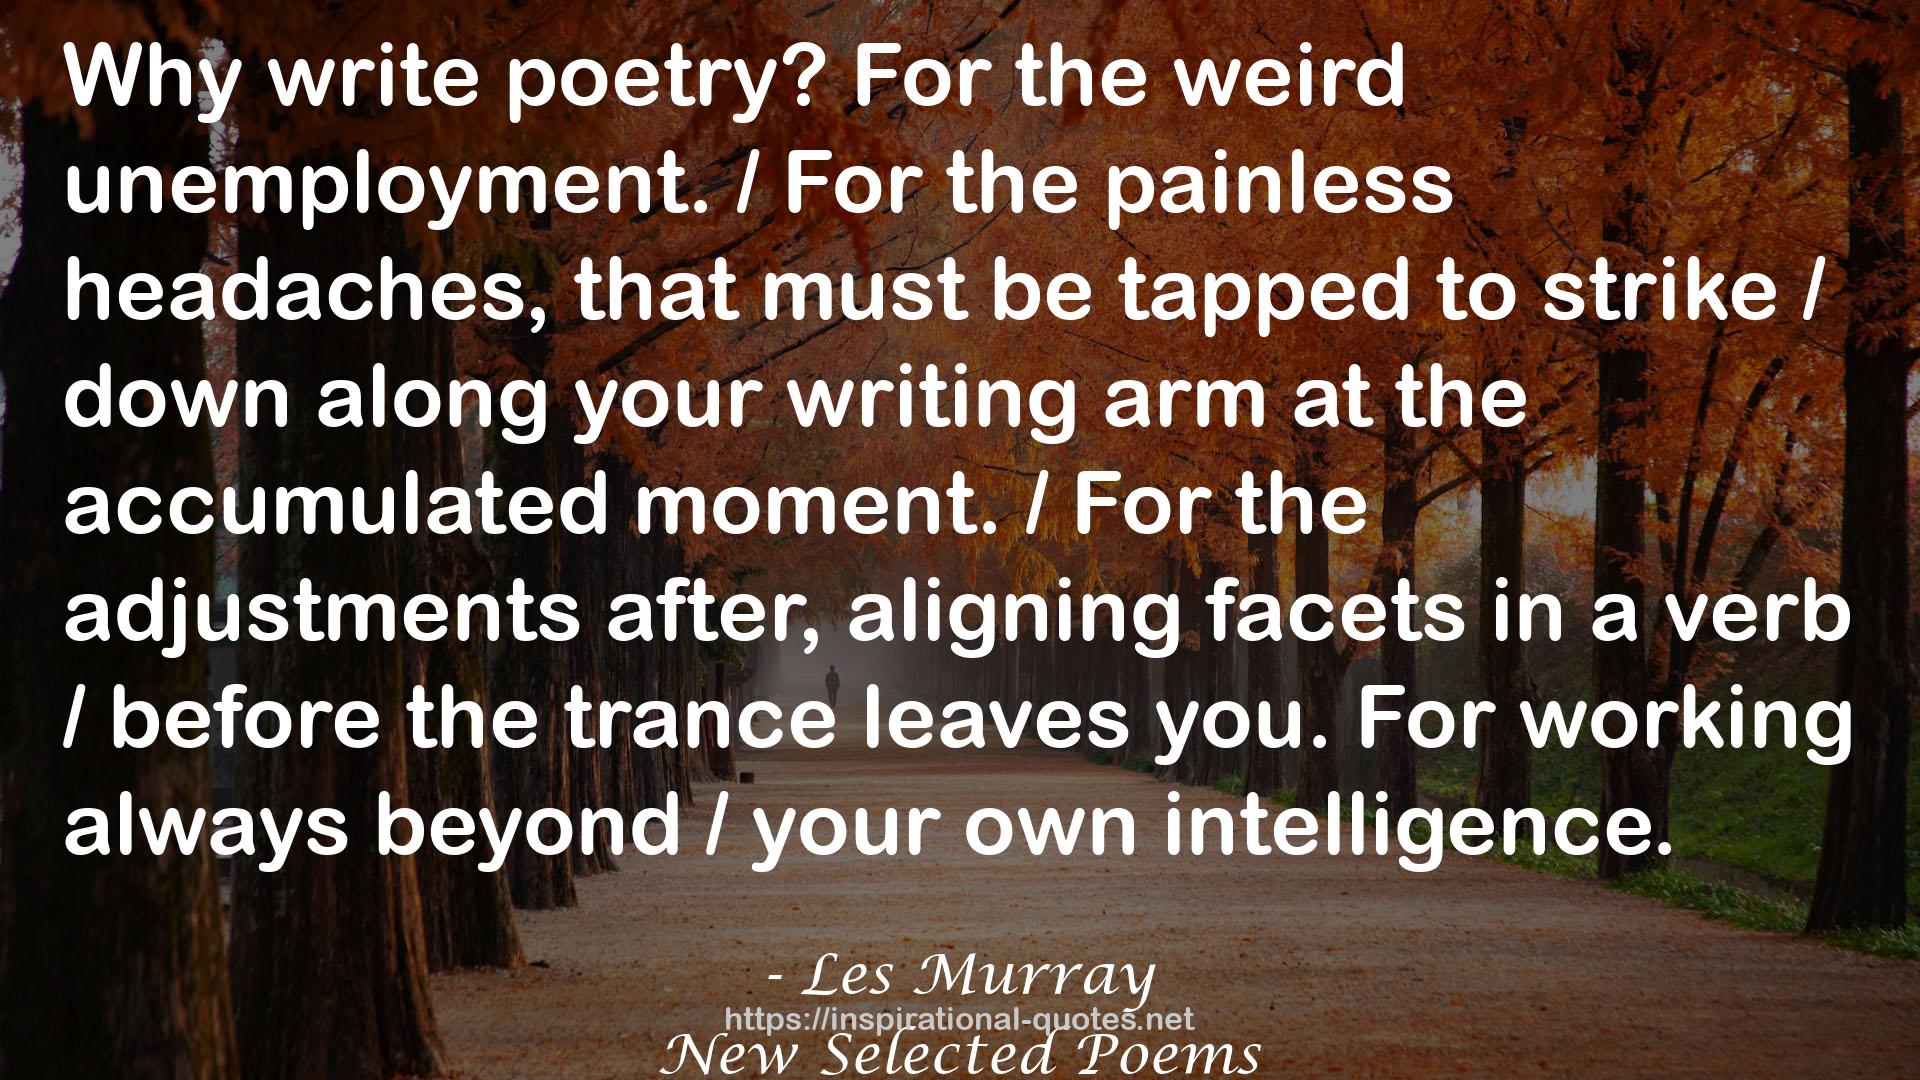 Les Murray QUOTES